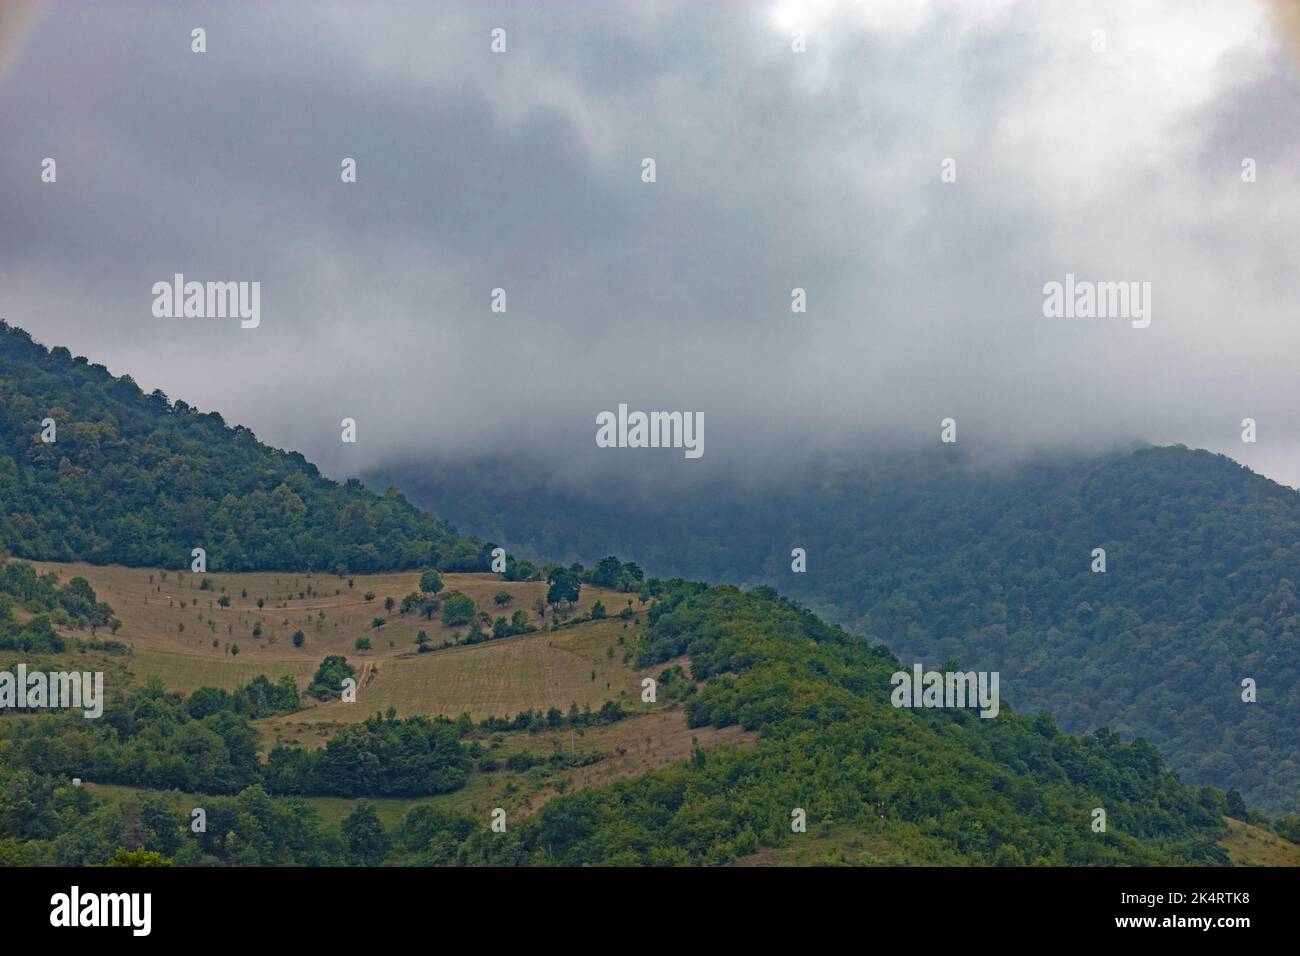 Mountain chain covered with forest and meadows on a foggy day, under low hanging clouds, in summer. Mountain peak covered with clouds. Stock Photo